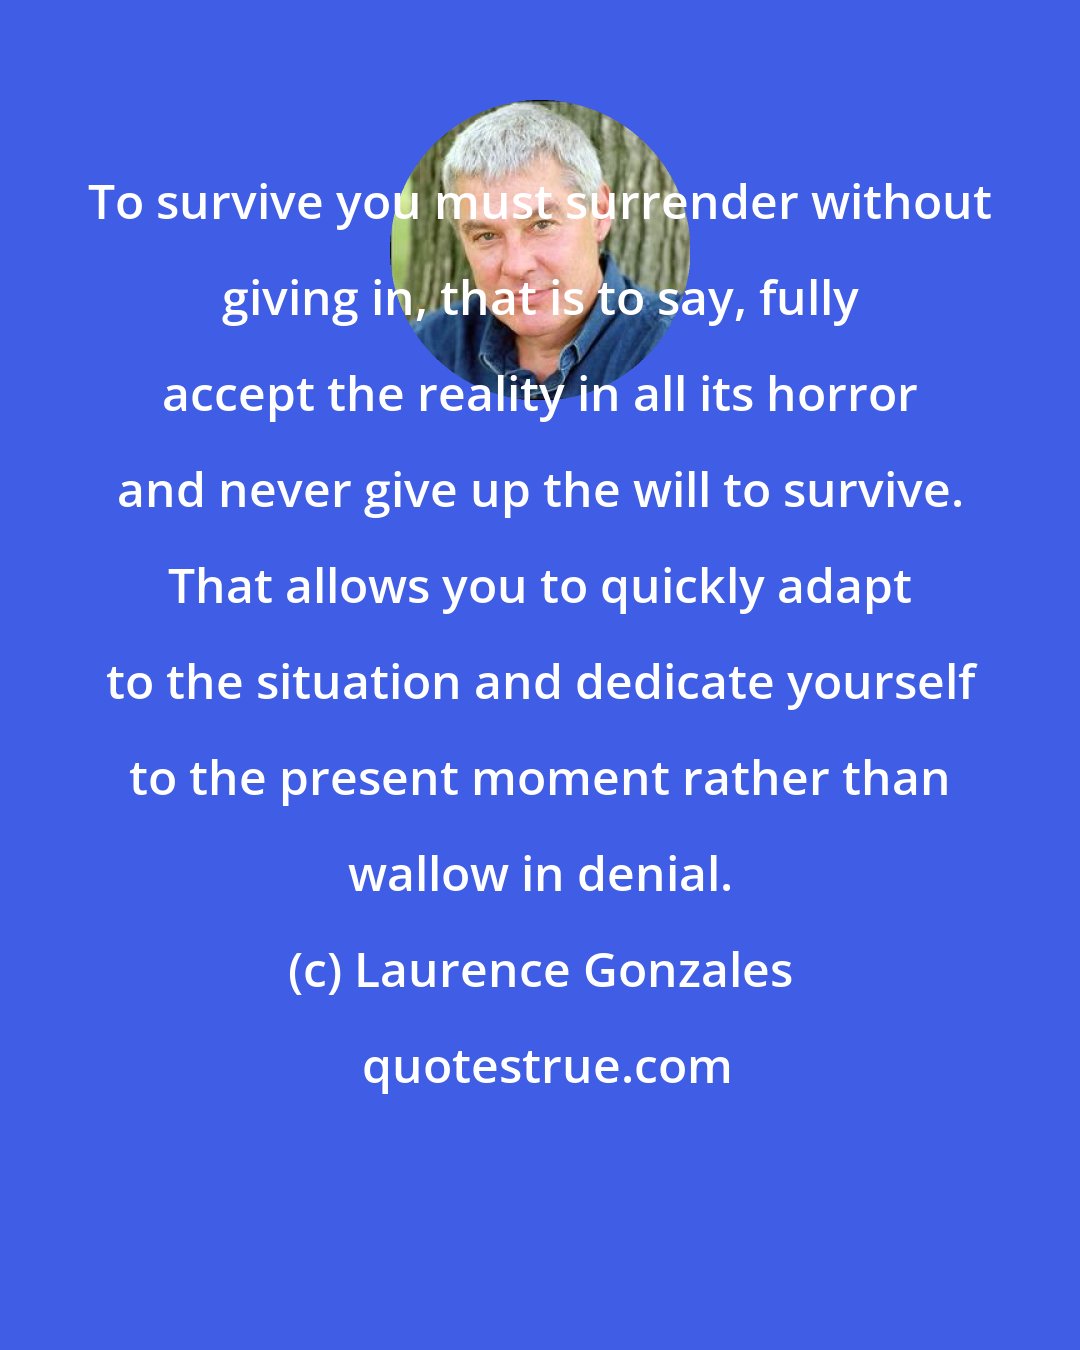 Laurence Gonzales: To survive you must surrender without giving in, that is to say, fully accept the reality in all its horror and never give up the will to survive. That allows you to quickly adapt to the situation and dedicate yourself to the present moment rather than wallow in denial.